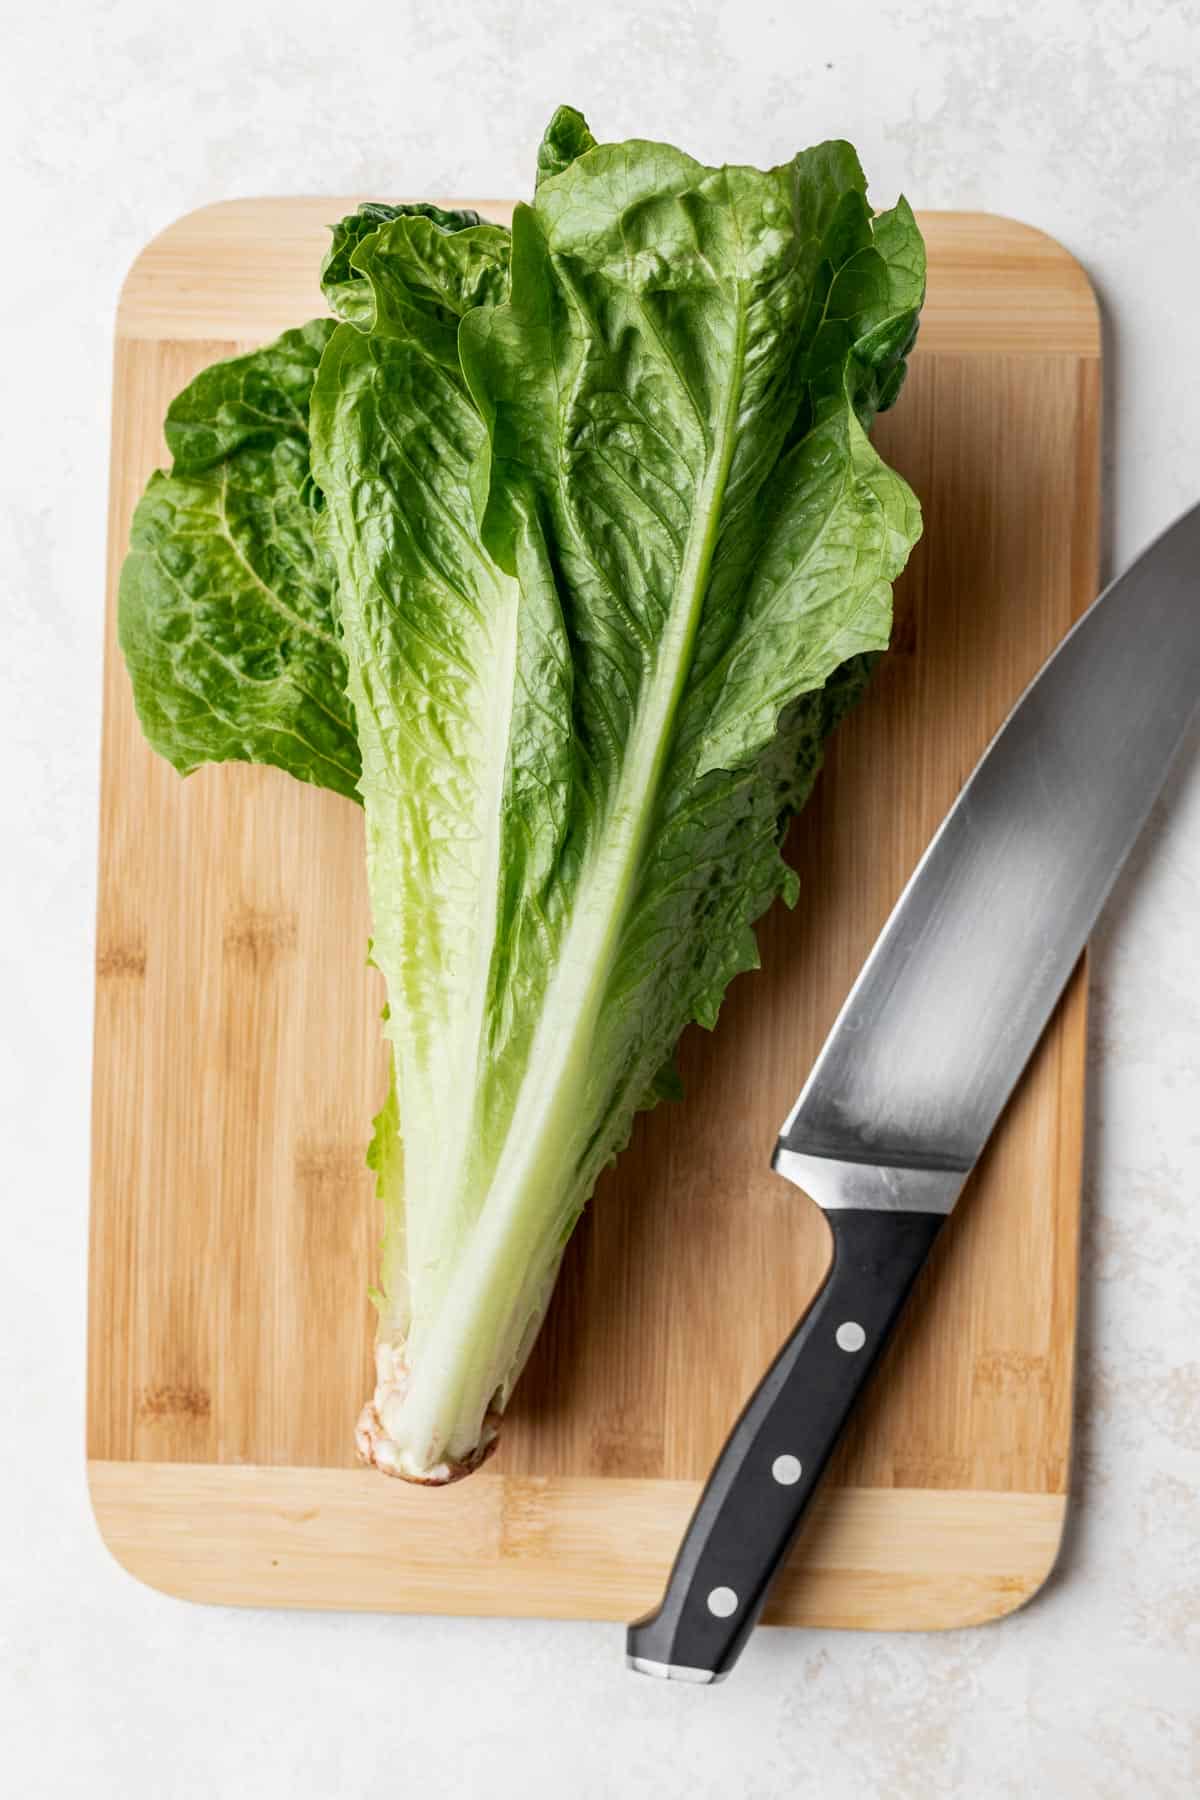 Romaine lettuce on a cutting board with a knife next to it.